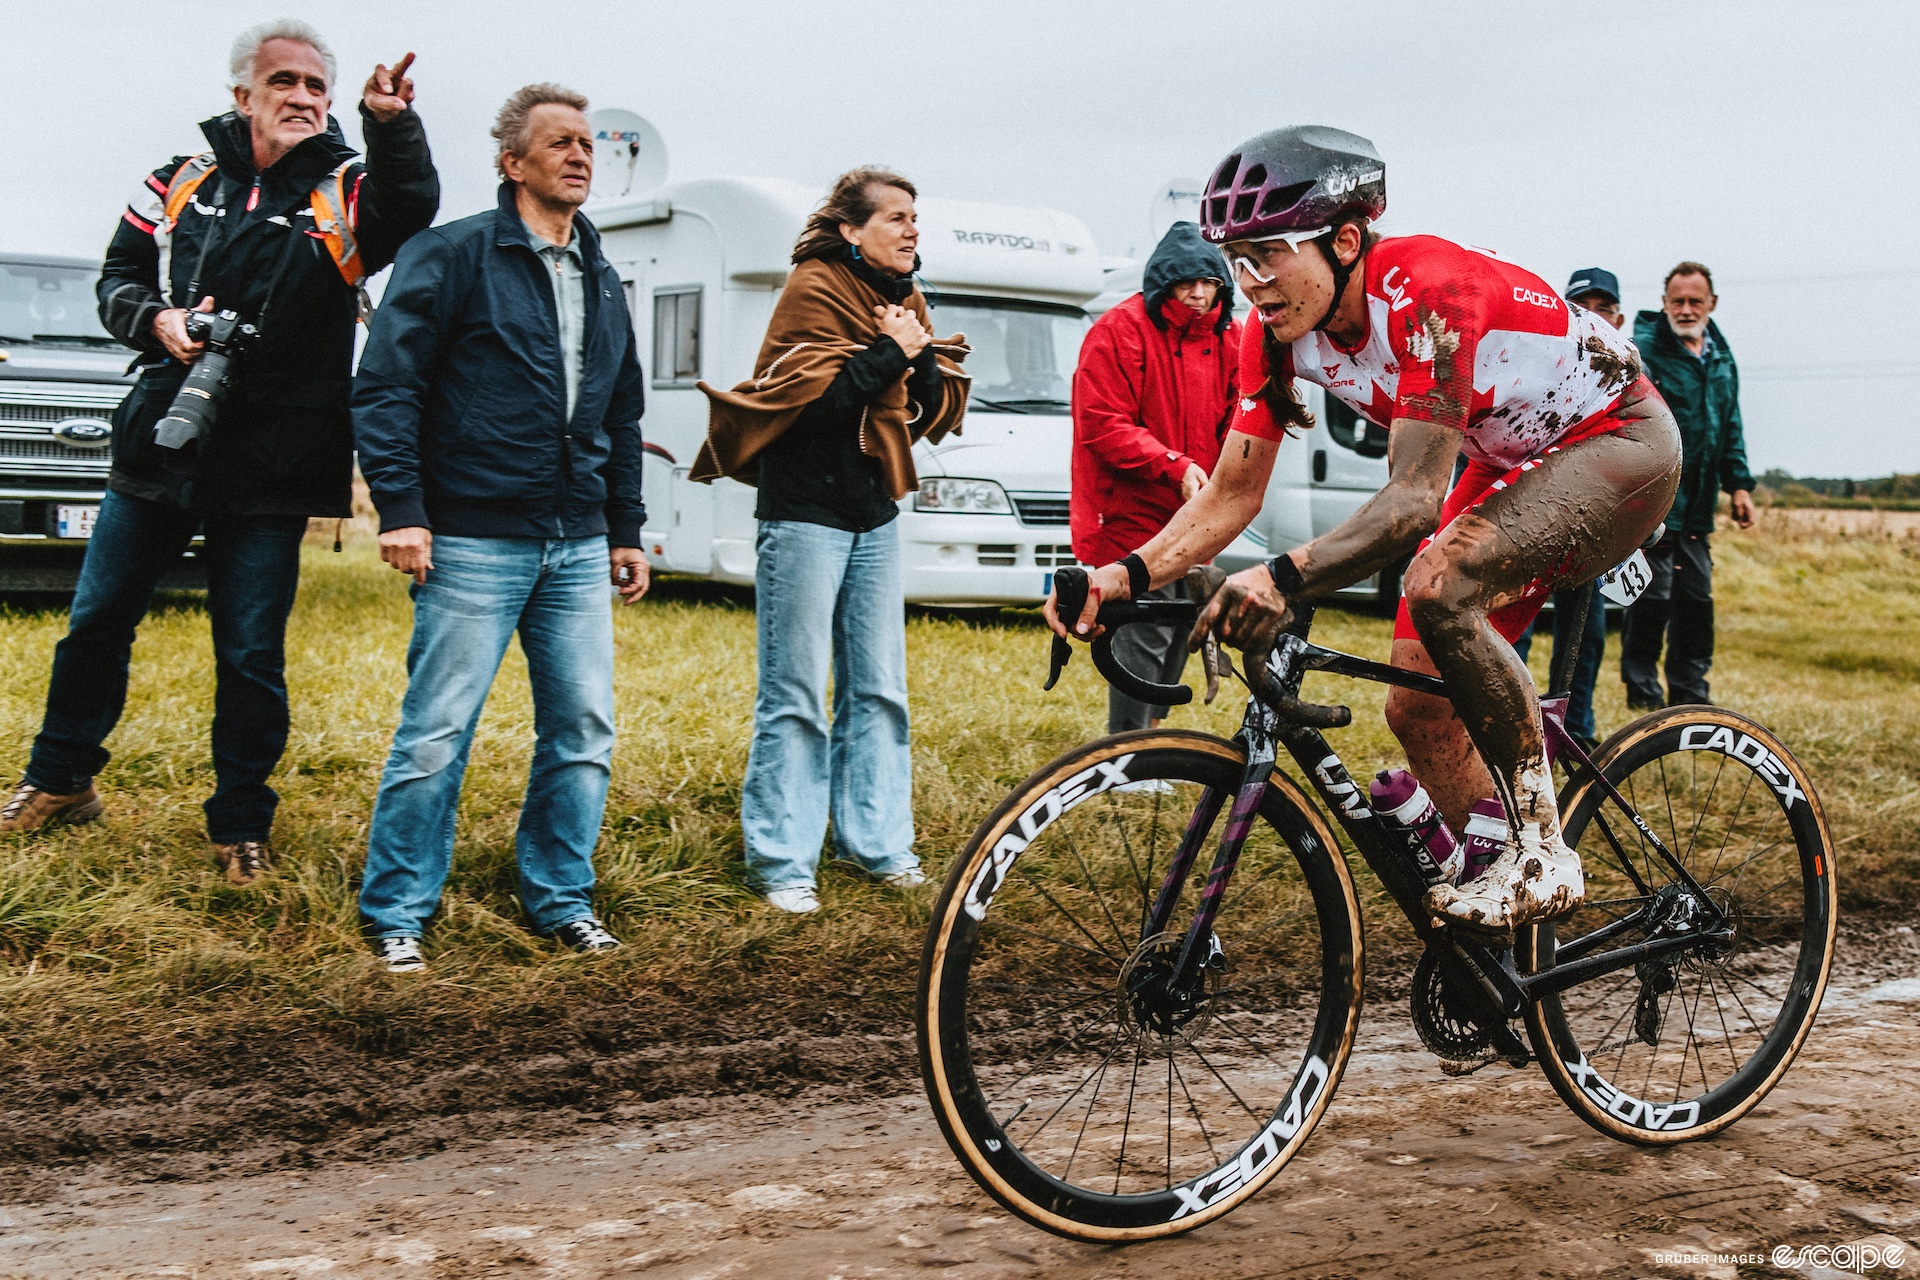 Alison Jackson rides across cobbles at the 2021 Paris-Roubaix, covered in mud. She has clearly fallen down at some point but is back on her bike looking grumpy. 